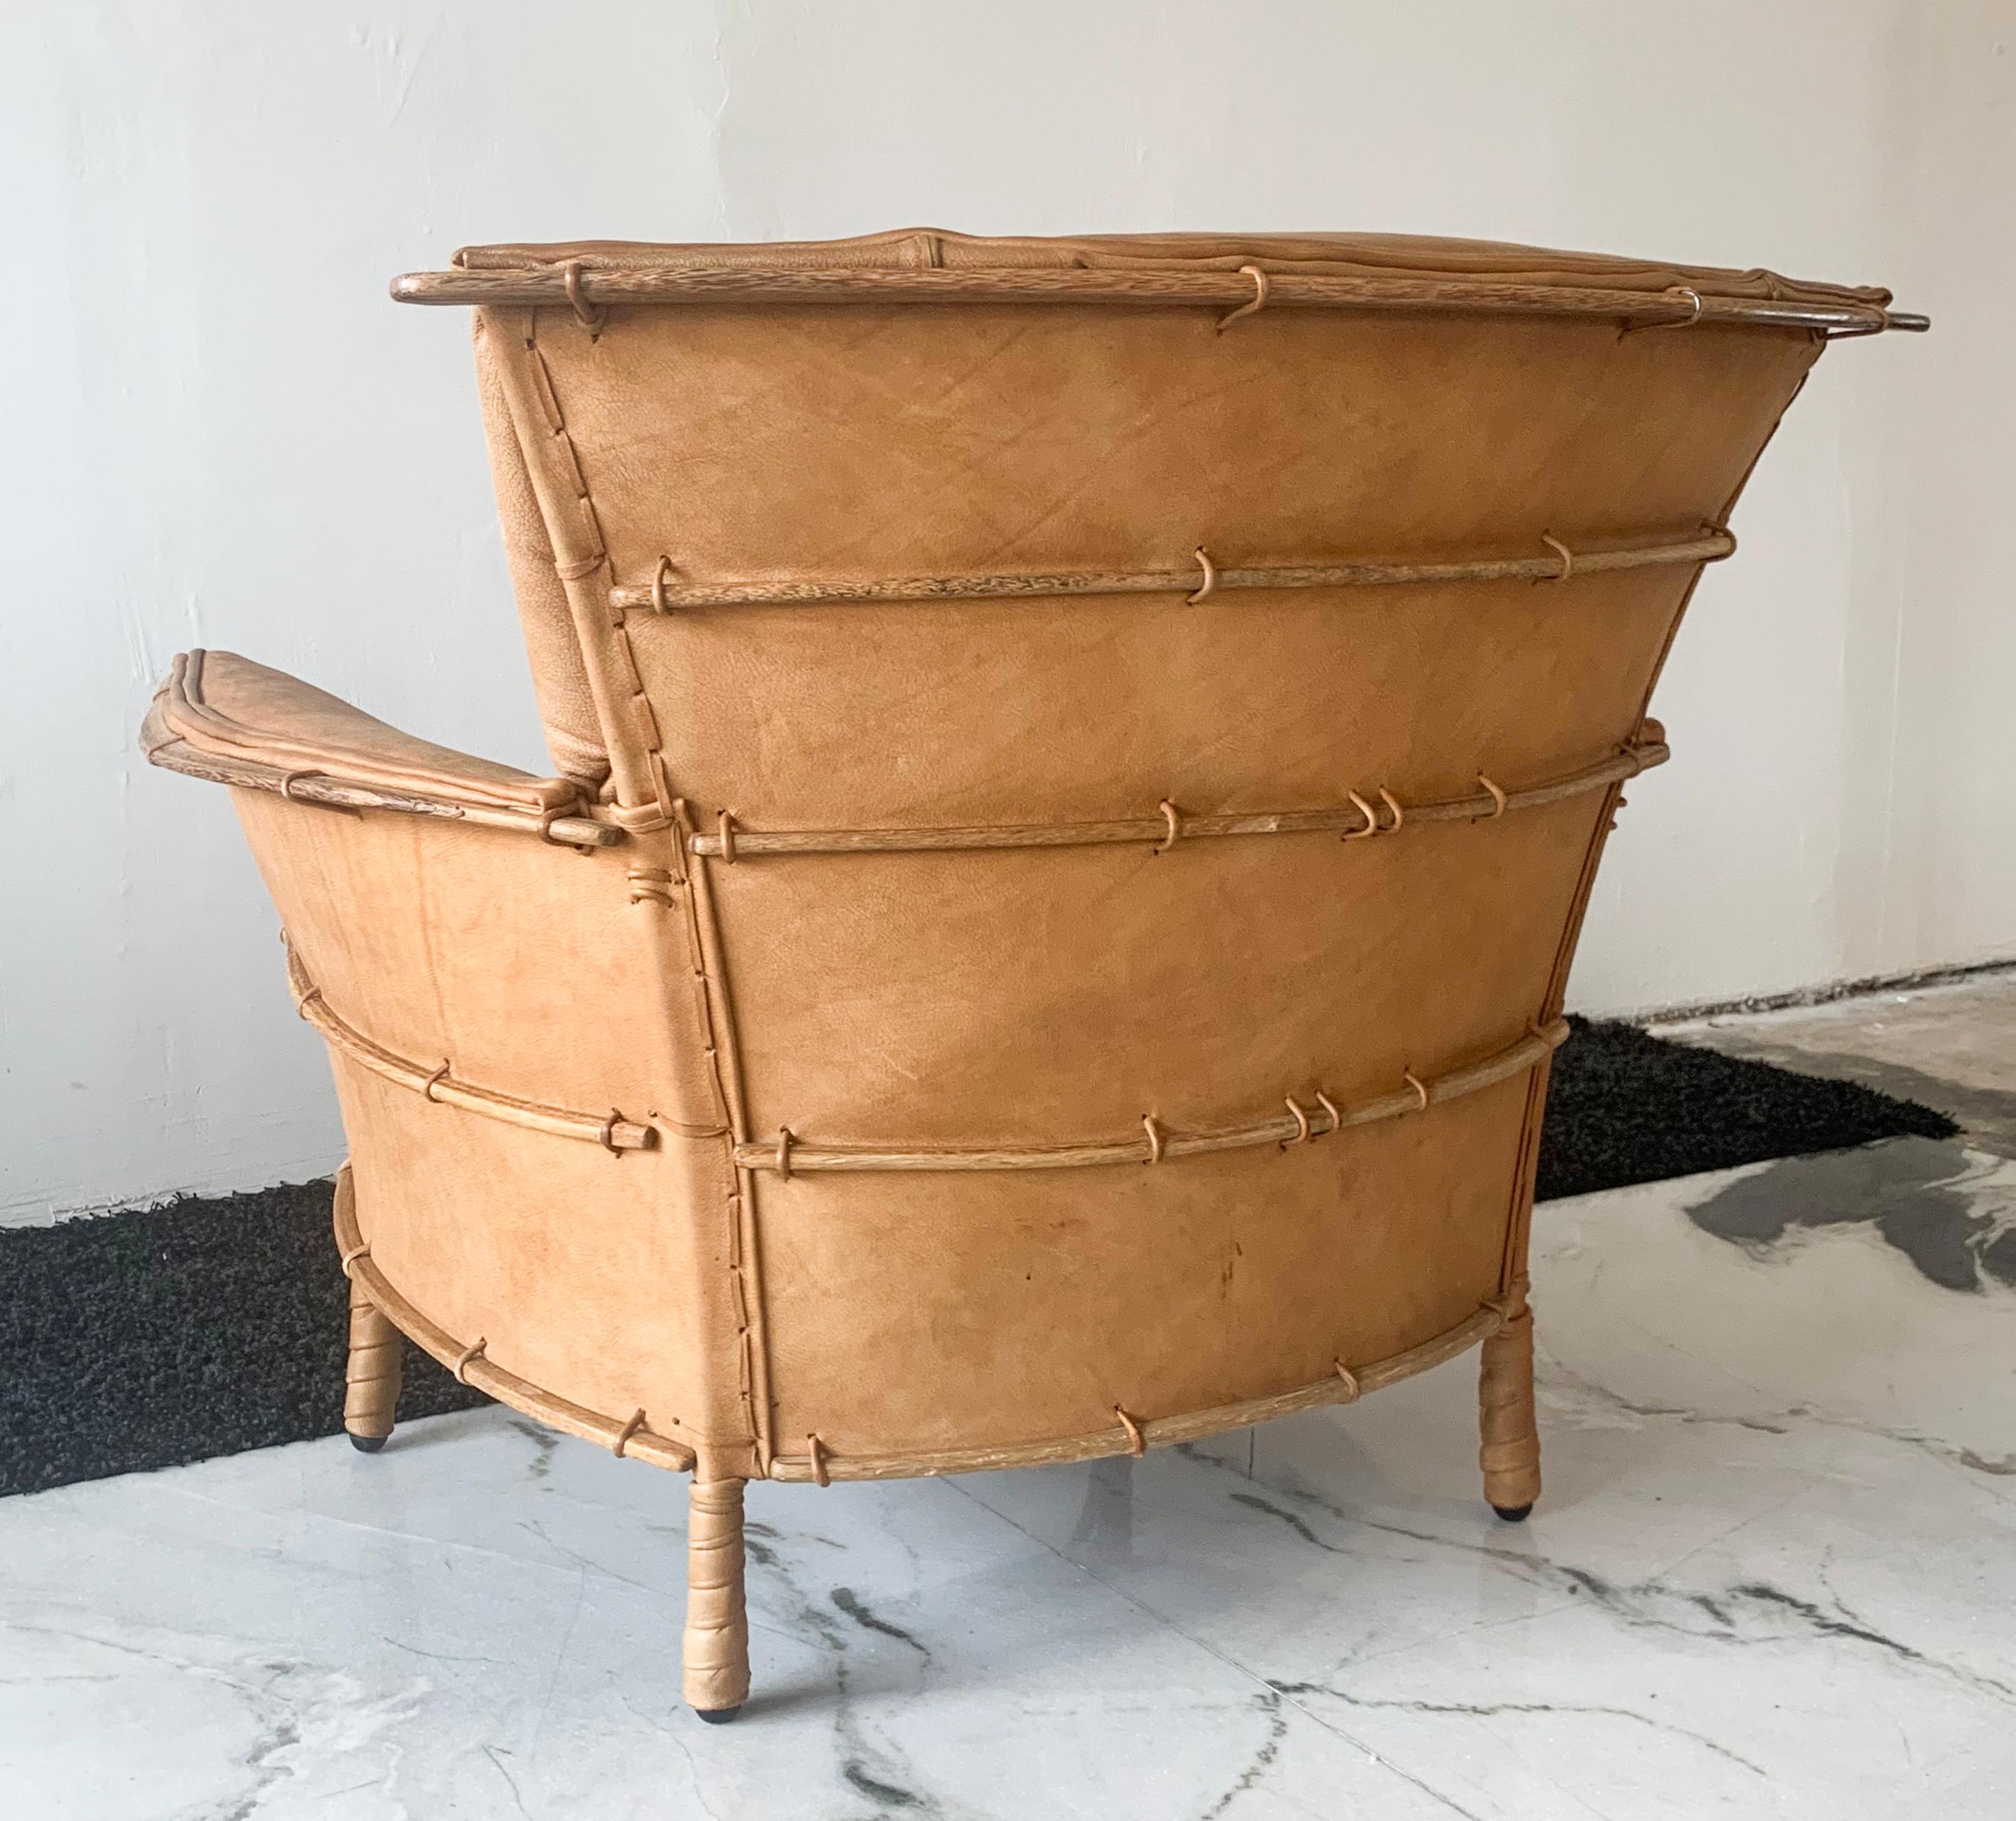 One look at this chair and it's obvious that it's special. Designed by Pacific Green Furniture, this cognac leather clad lounge features palm wood ribs / boning throughout the frame and back that echo the canoe building techniques by Indigenous and